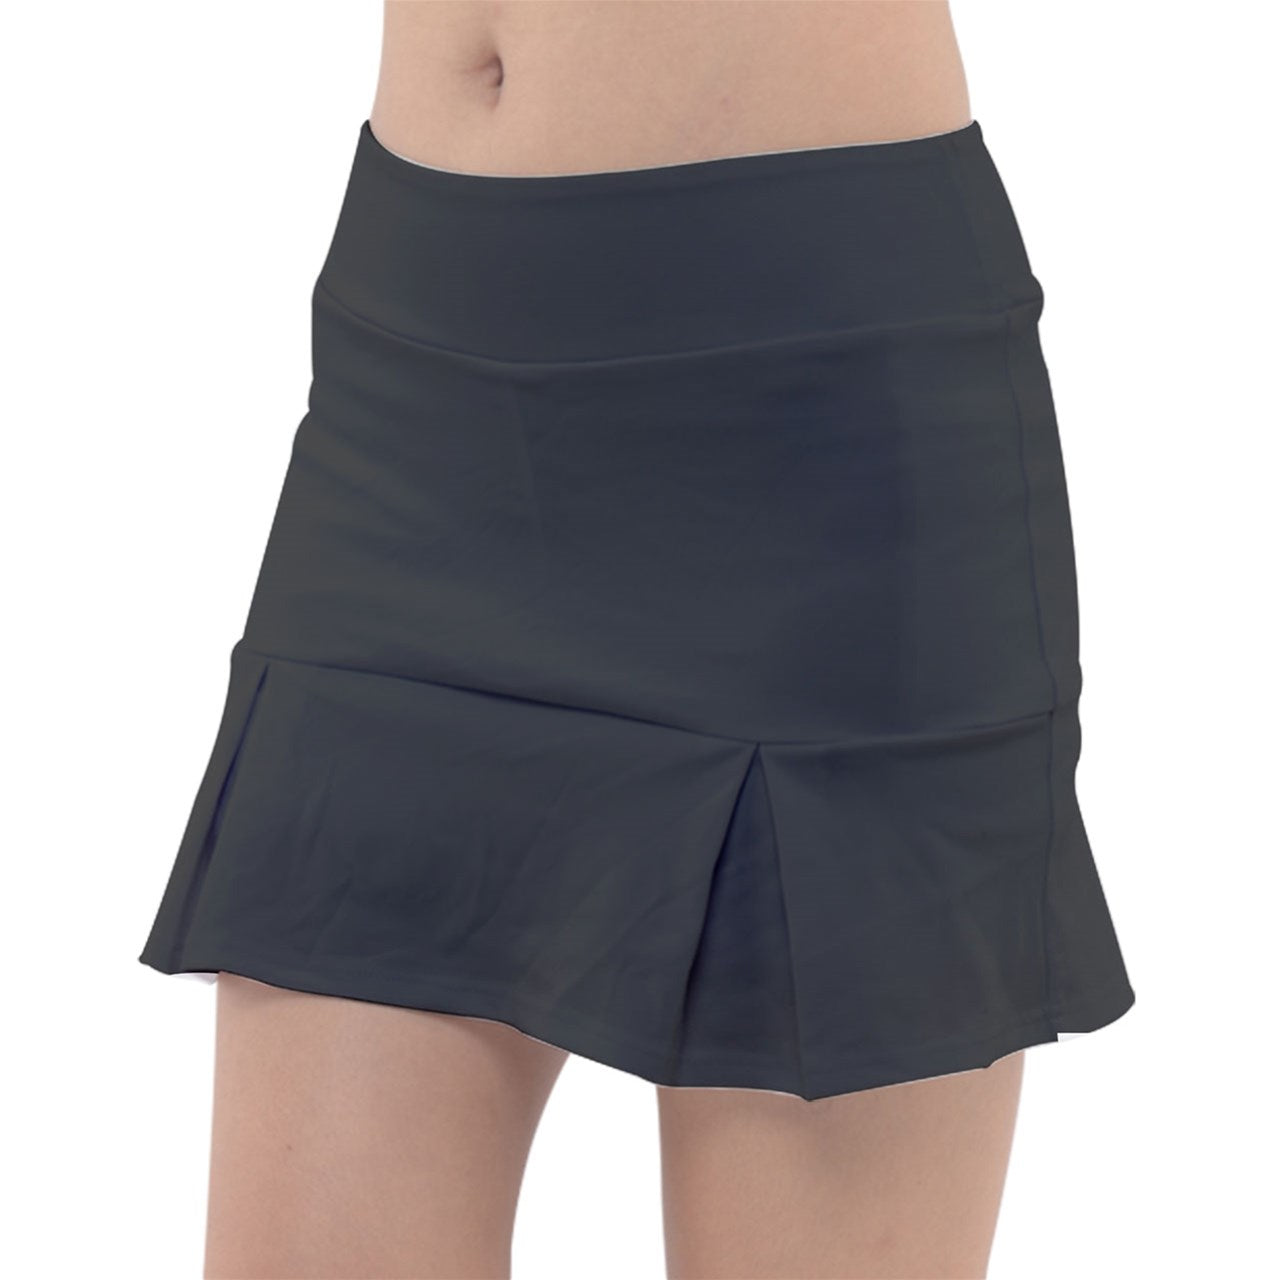 Dizzy Pickle Heidi BKW Solid Classic Women's Pickleball Pleated Skorts with Inner Shorts & Pockets Black